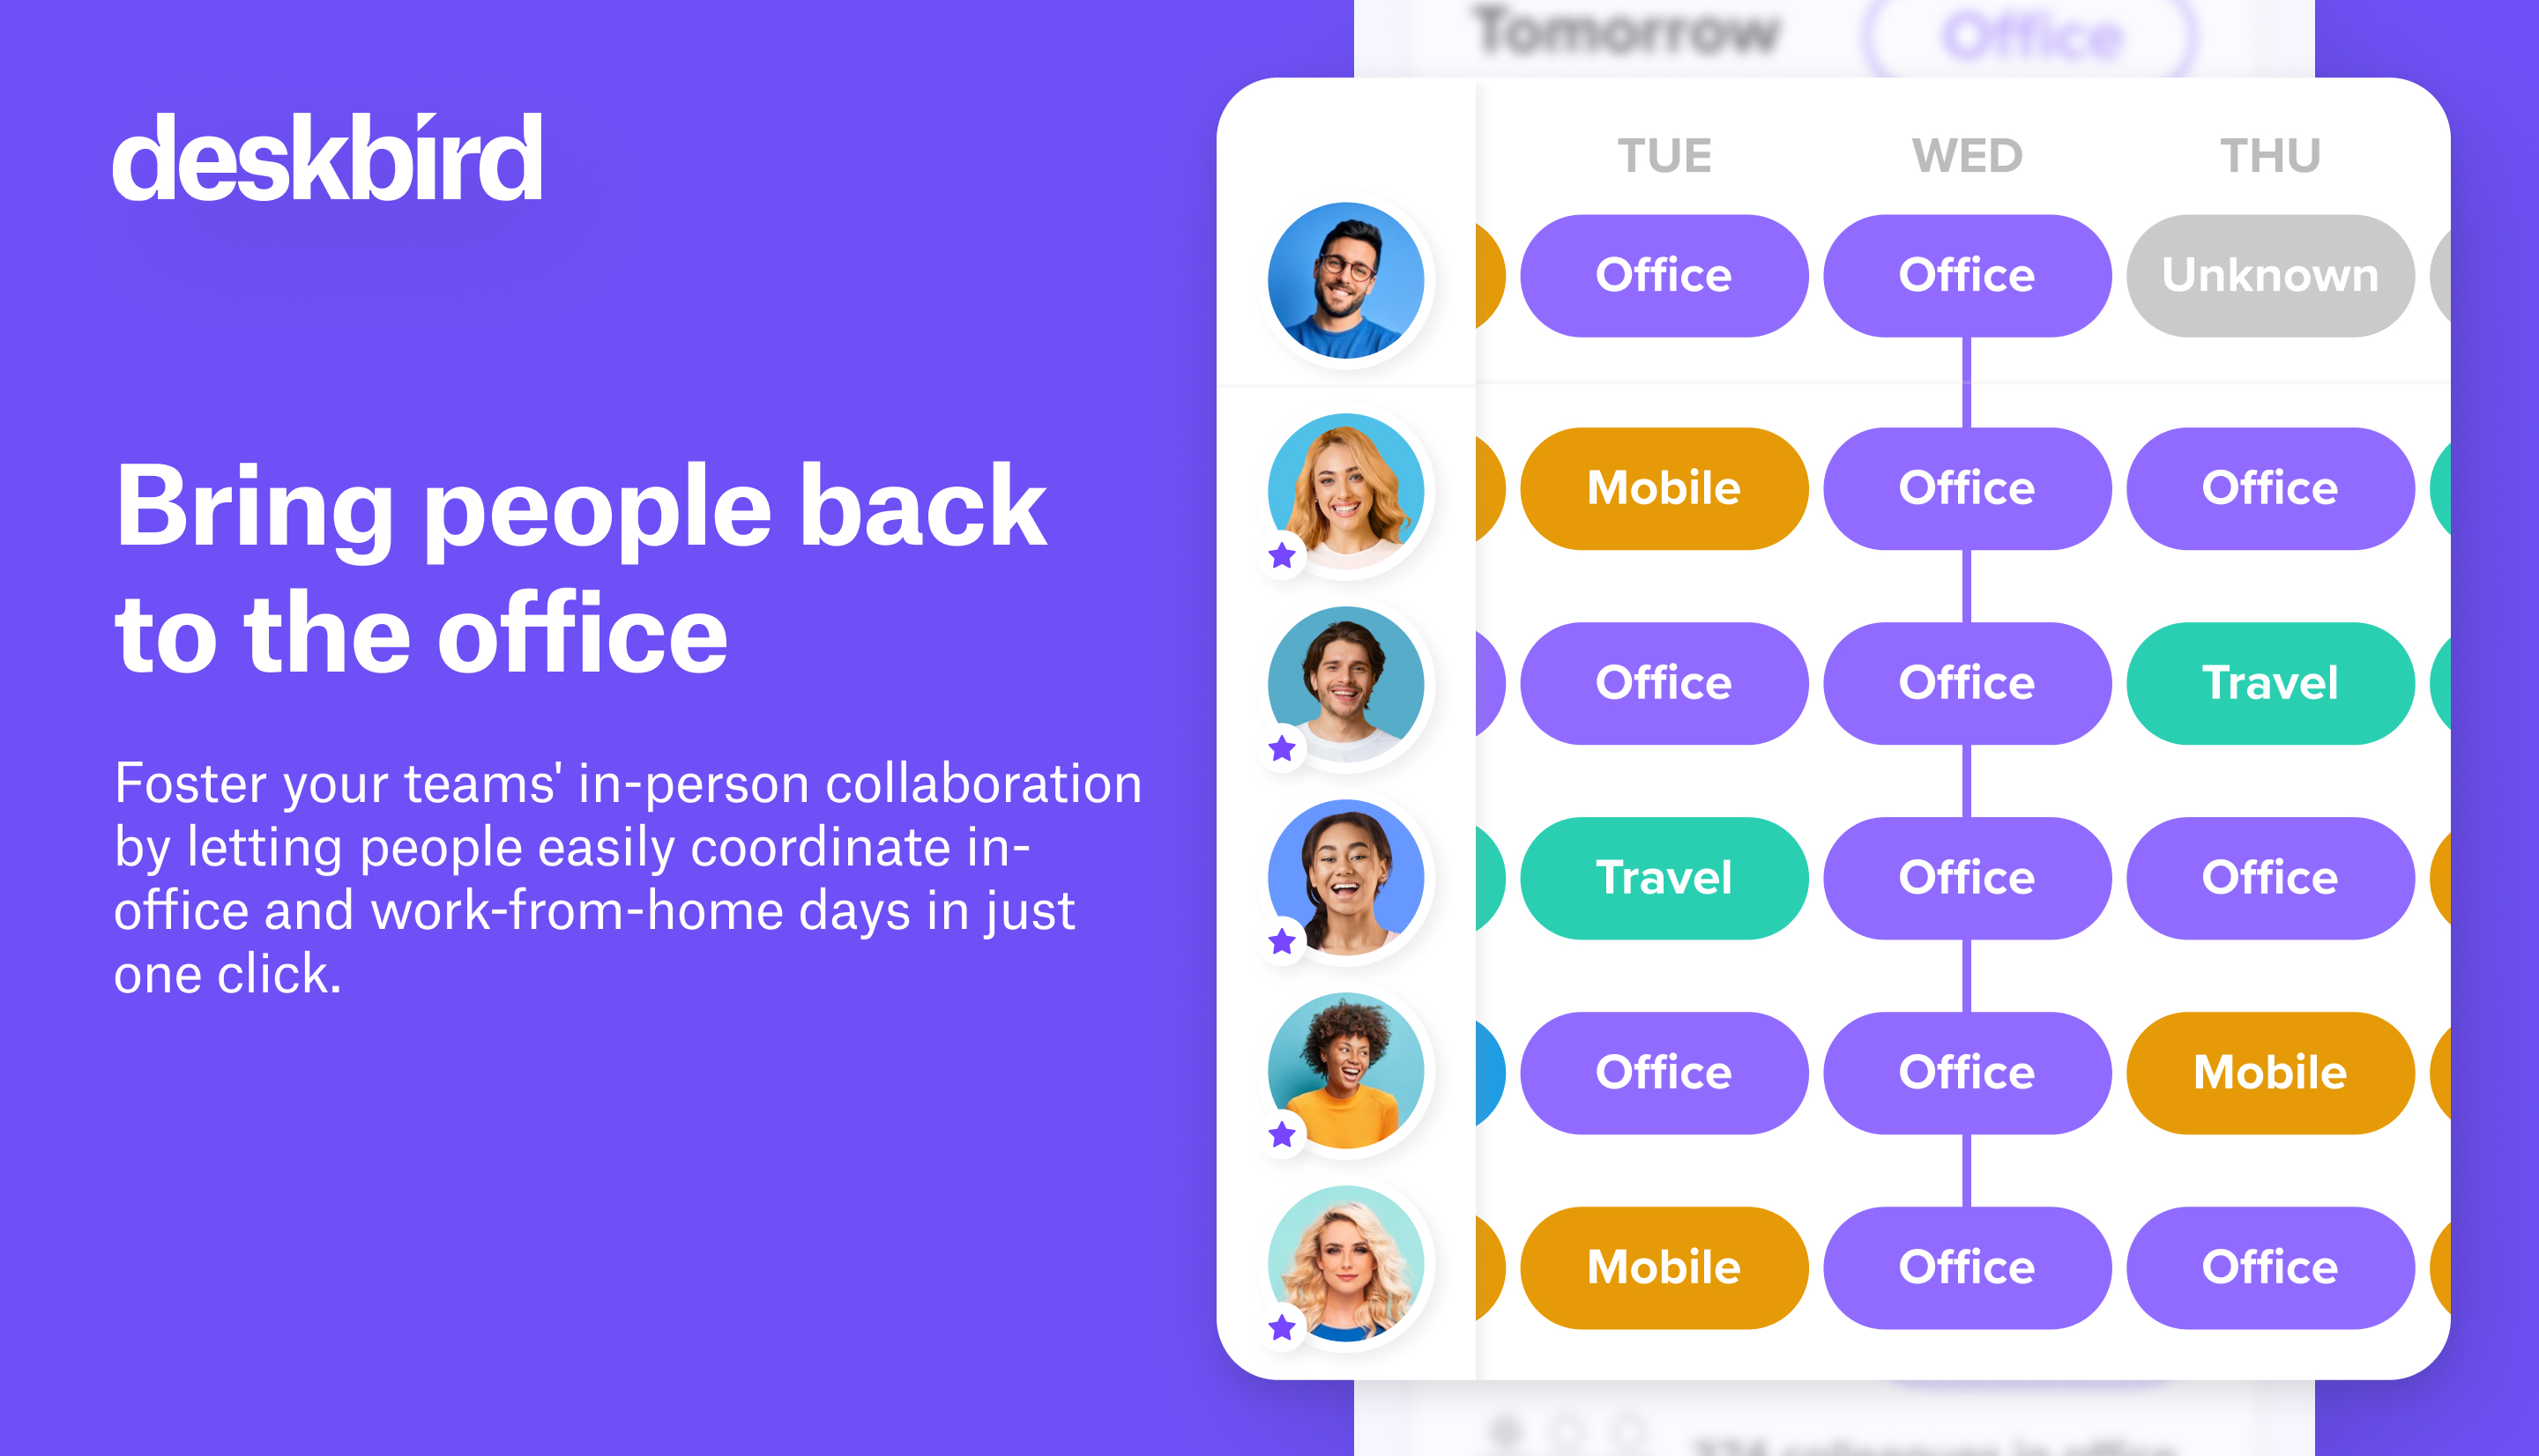 Plan your in-office and remote days